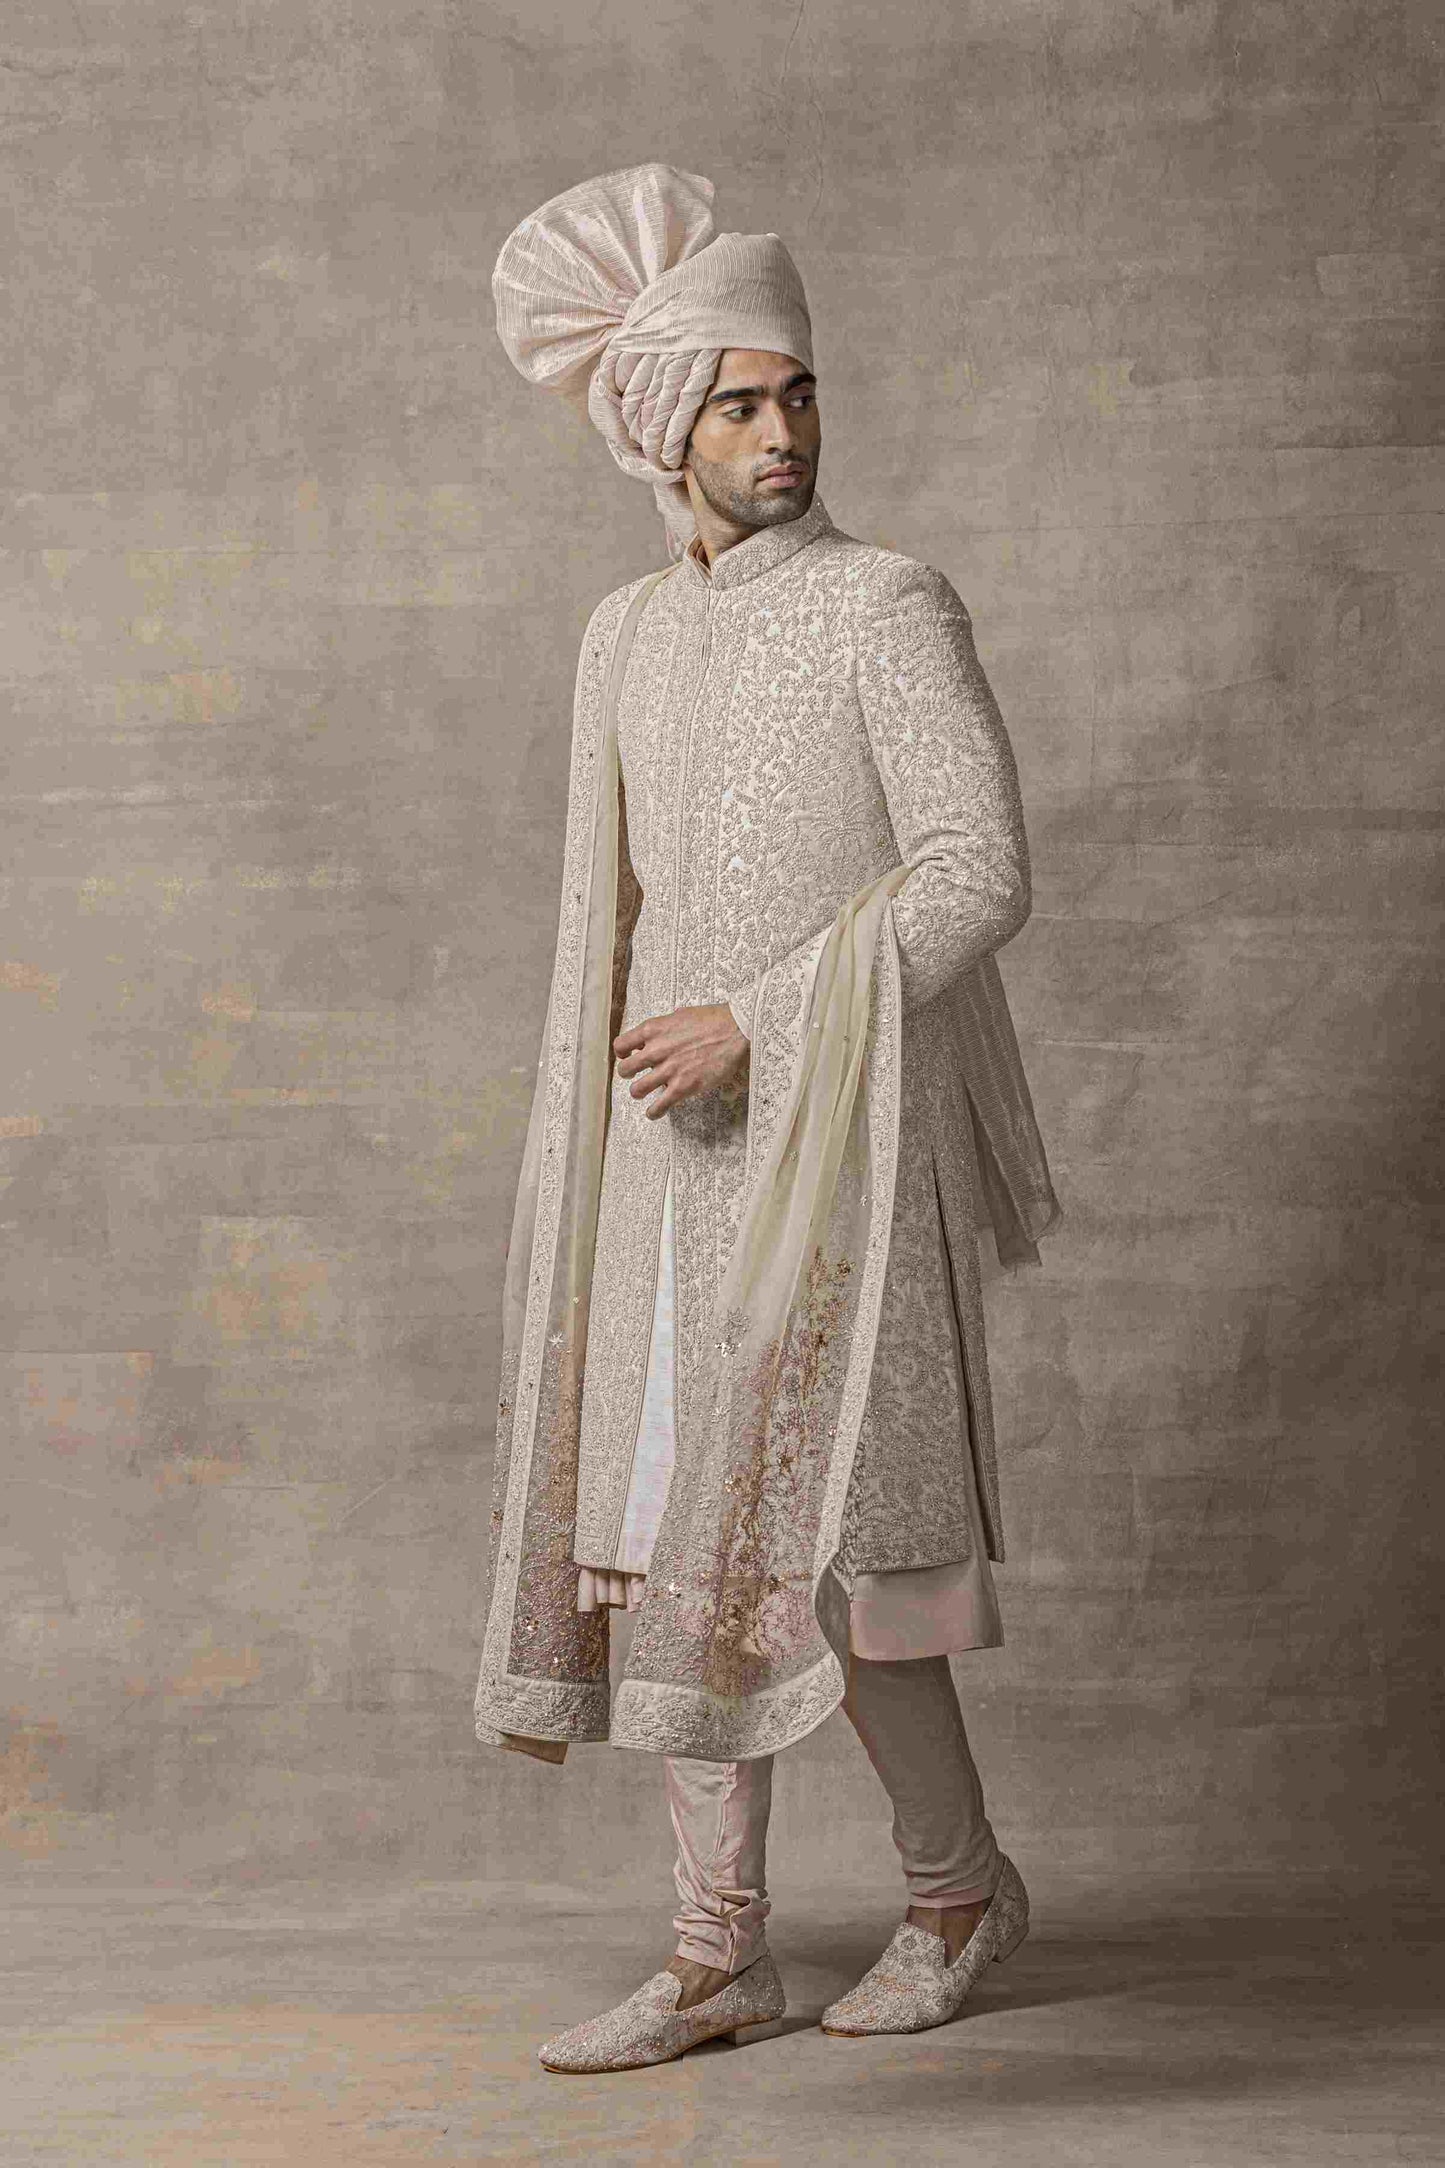 Dusty Rose Sherwani With Thread Work Highlighted With Pearl And Sequin